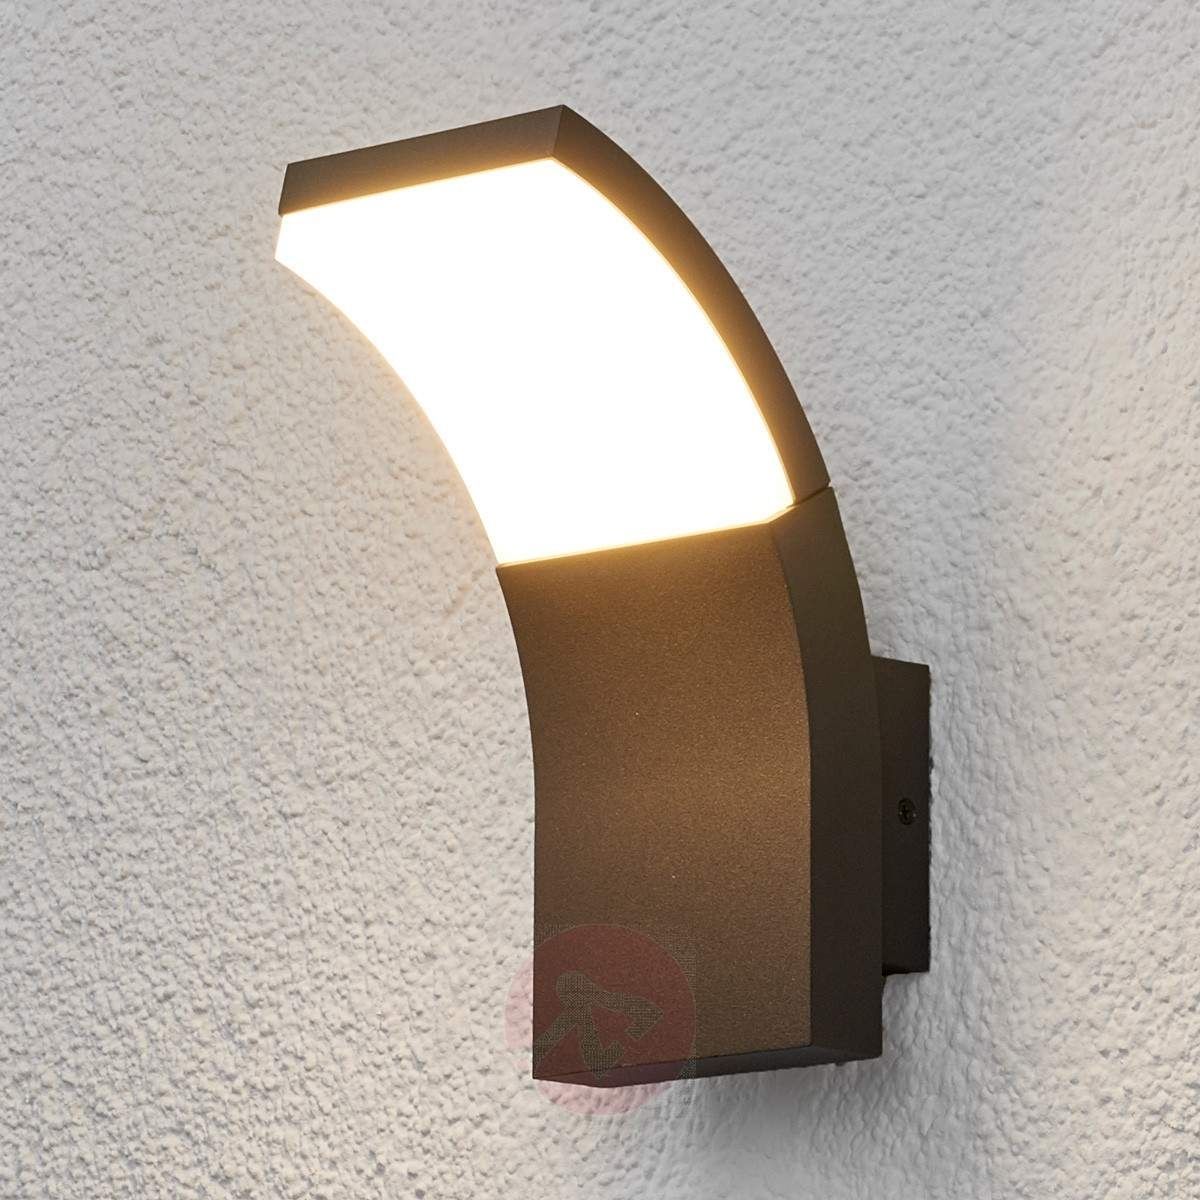 Led Outdoor Wall Light Timm | Lights (View 4 of 15)